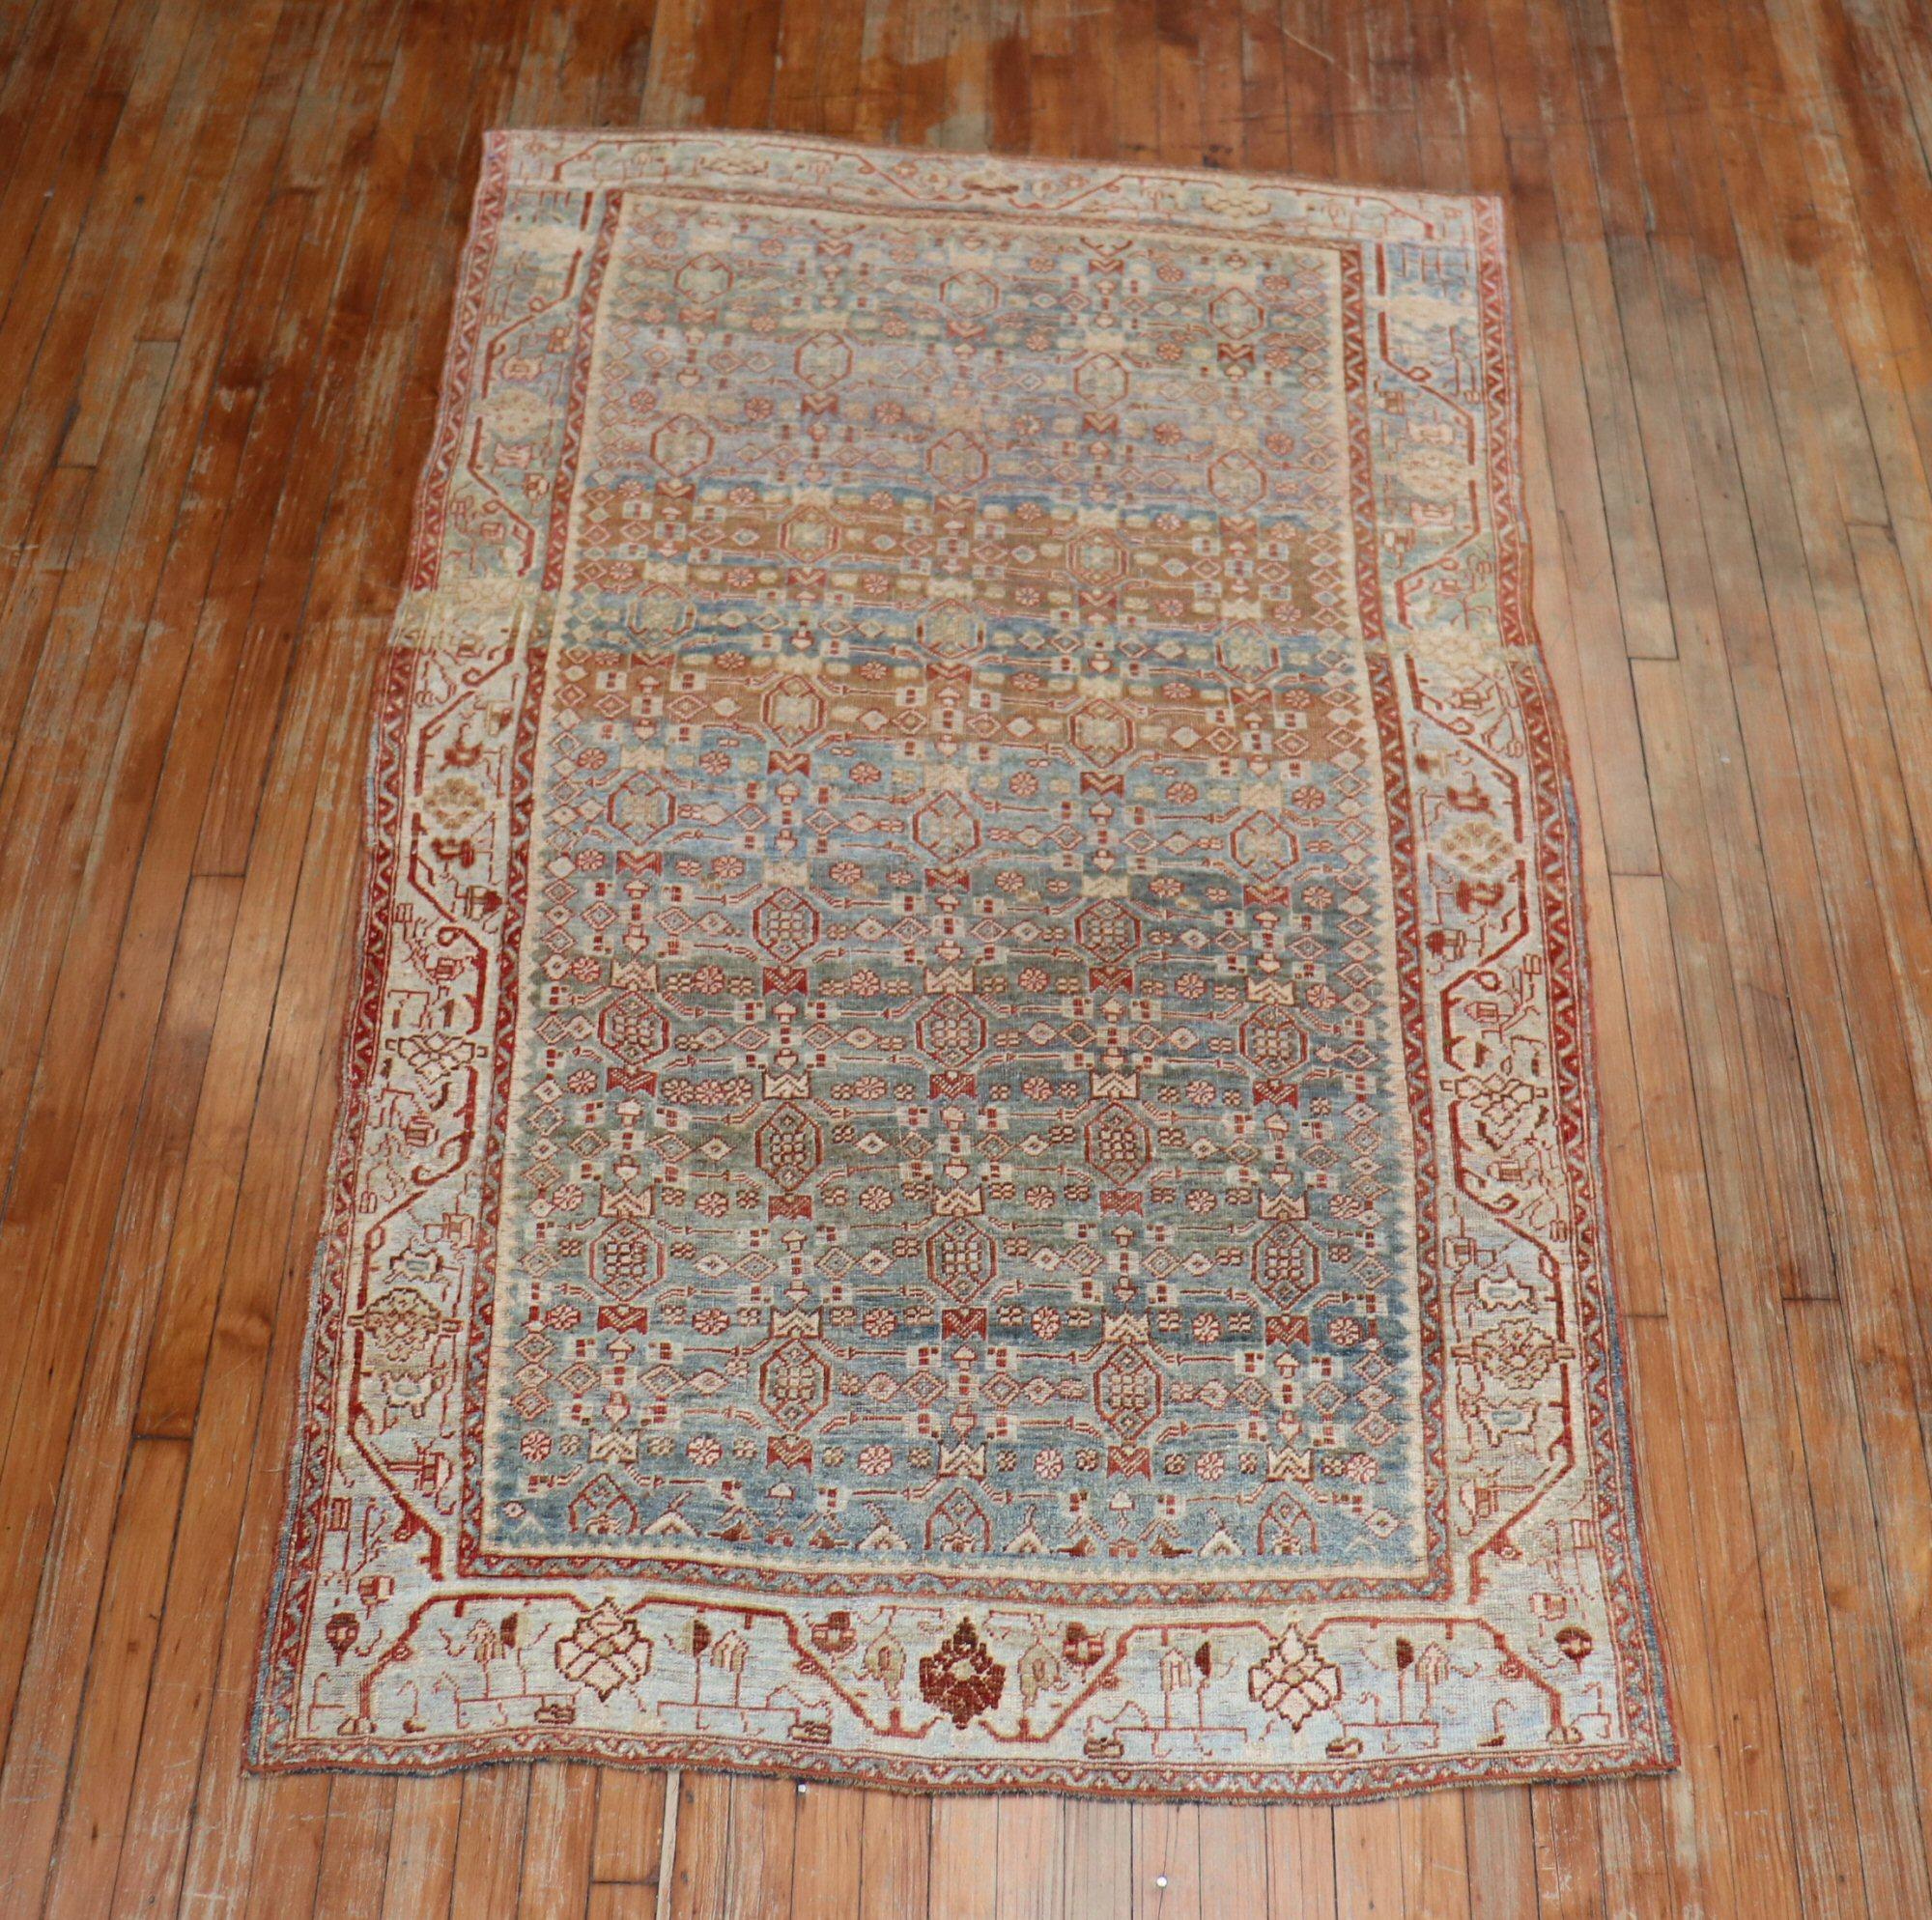 Masculine best describes this Persian Bidjar rug from the early 20th century with an all-over Herati design in dominant soft blue and red accents

Measures: 4'3